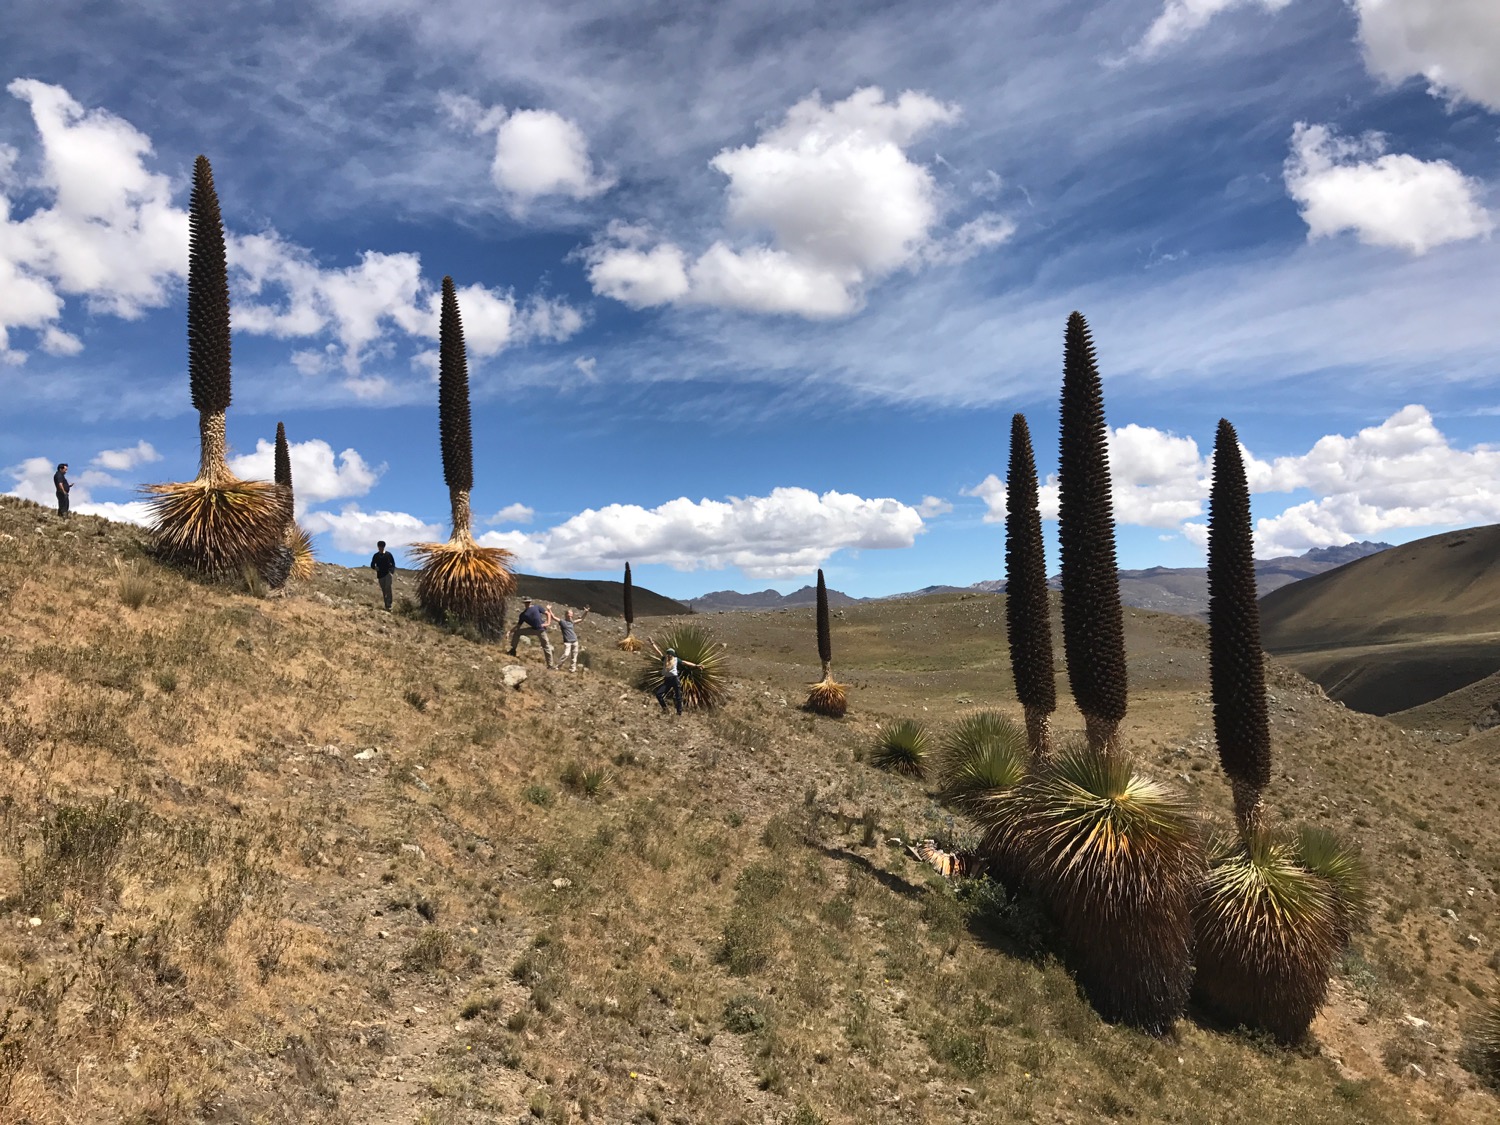 These strange trees are only found in Peru.